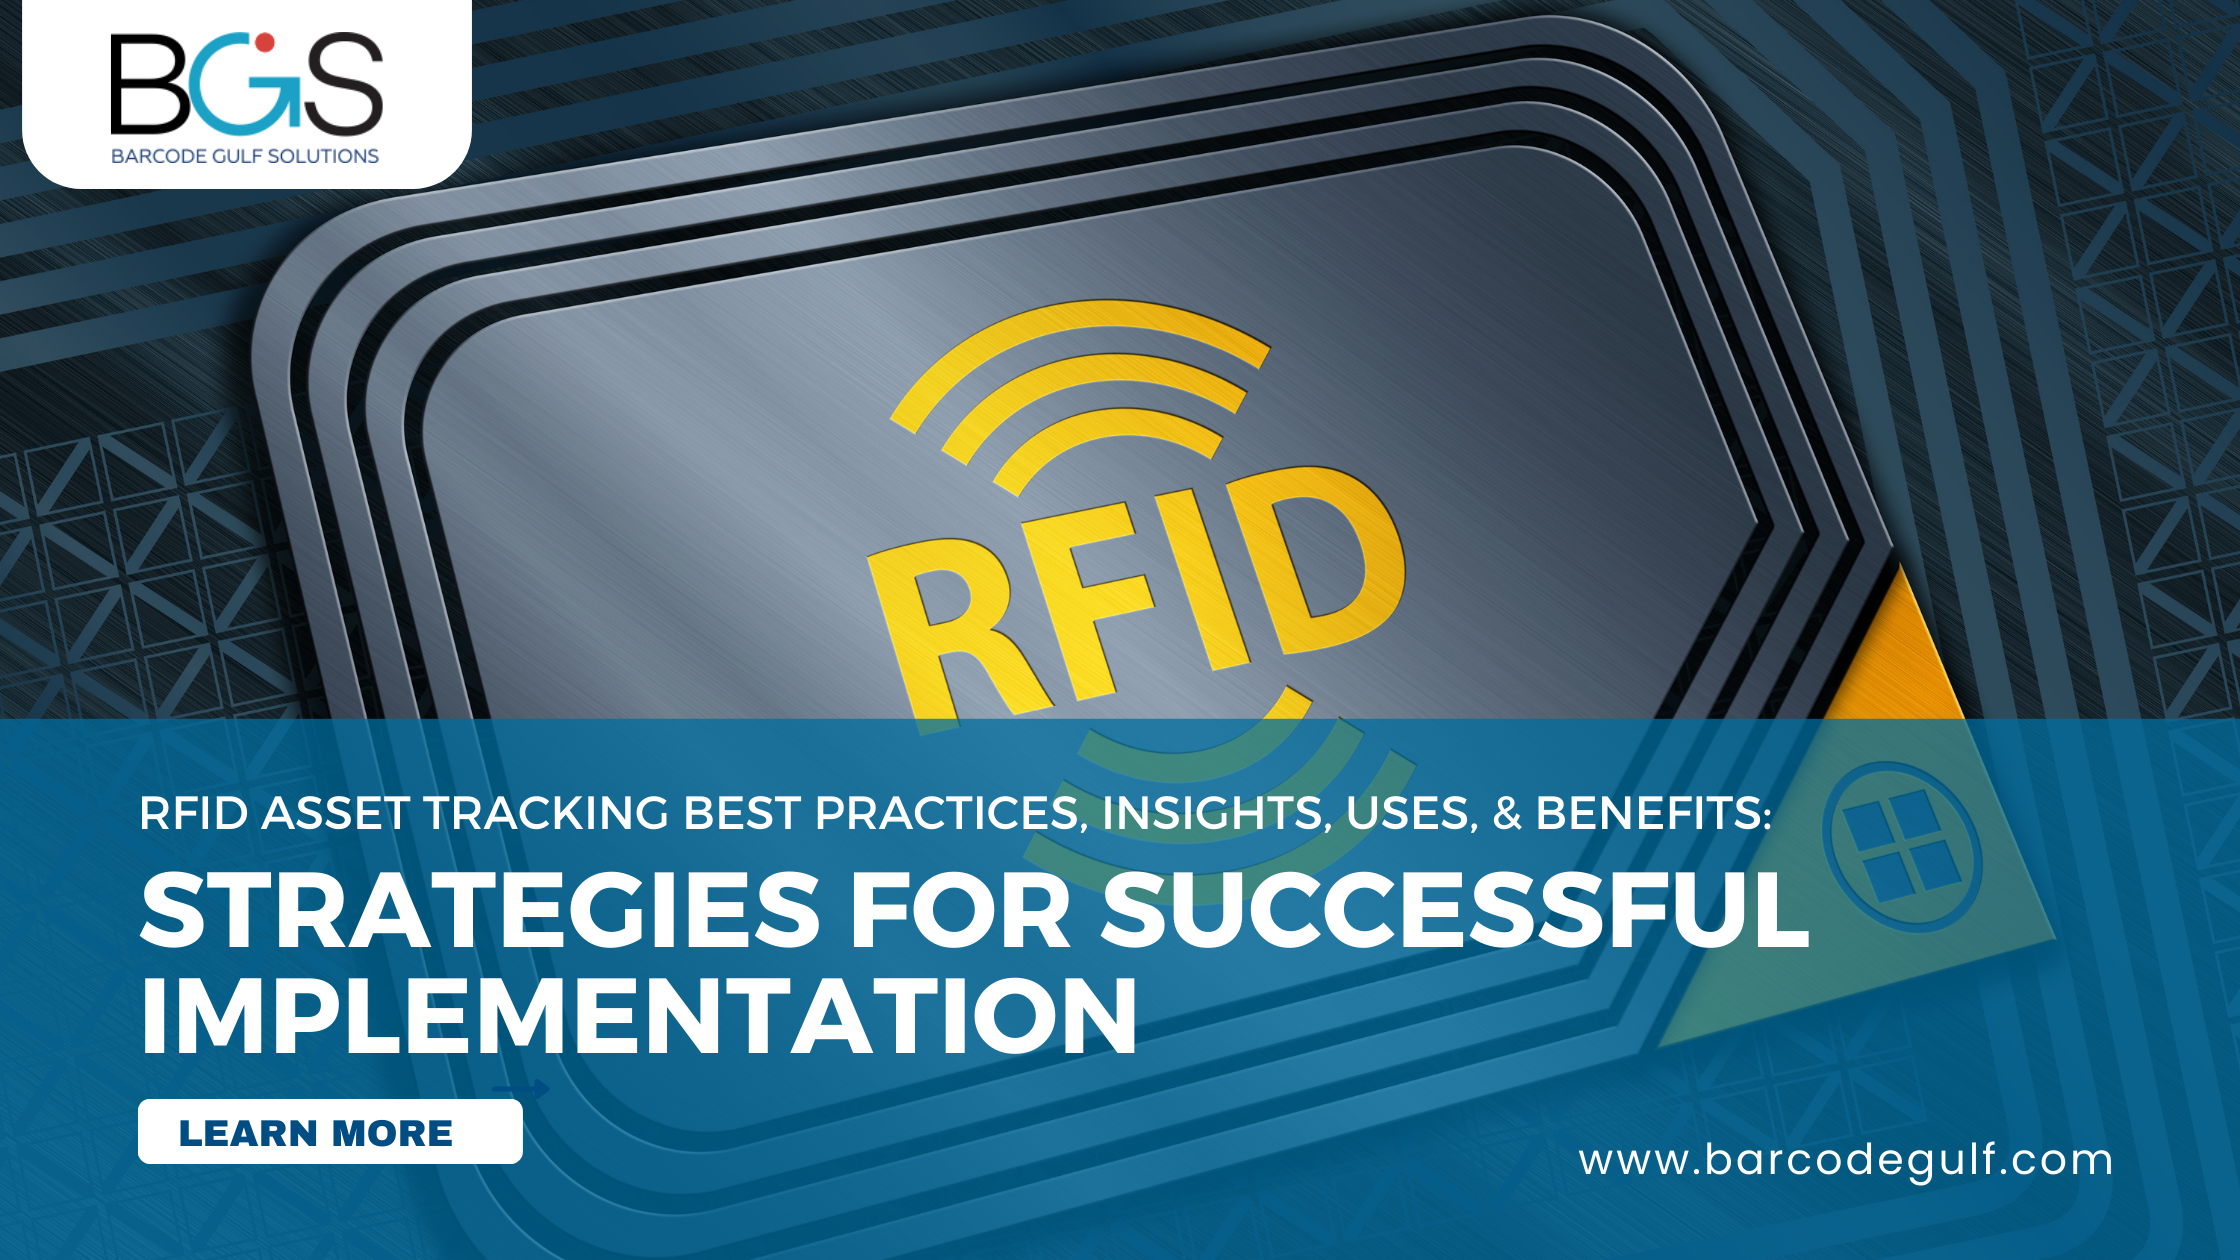 RFID-Asset-Tracking-Best-Practices-Insights-Uses-Benefits-Barcode-Gulf-Solutions